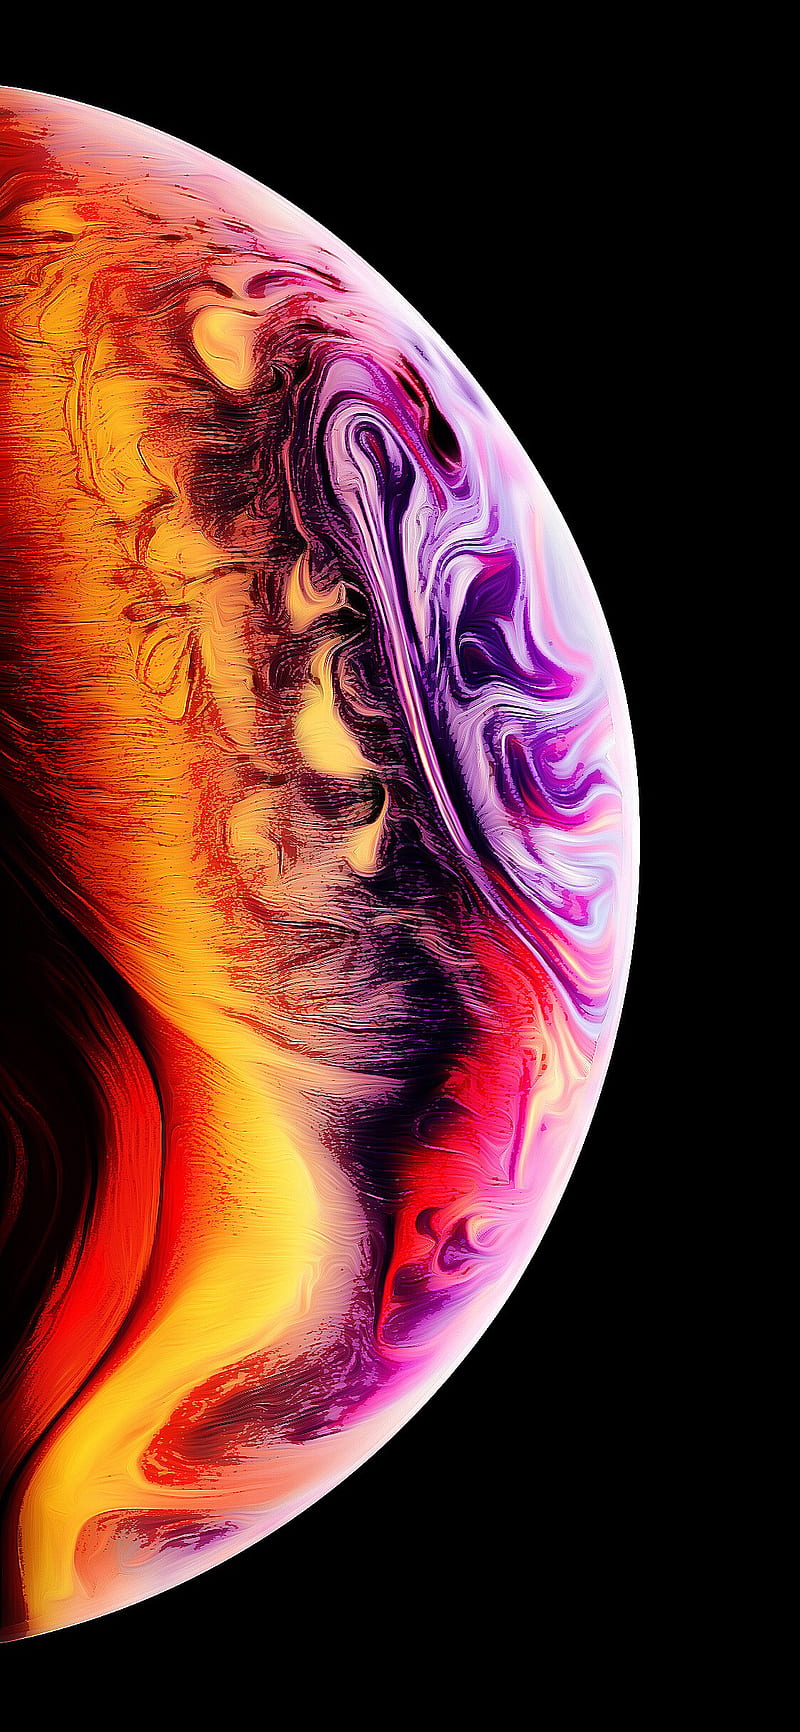 Apple IPhone xs , apple iphone xs, iphone xs, iphone x, 7itech , space, cosmos, planet, HD phone wallpaper